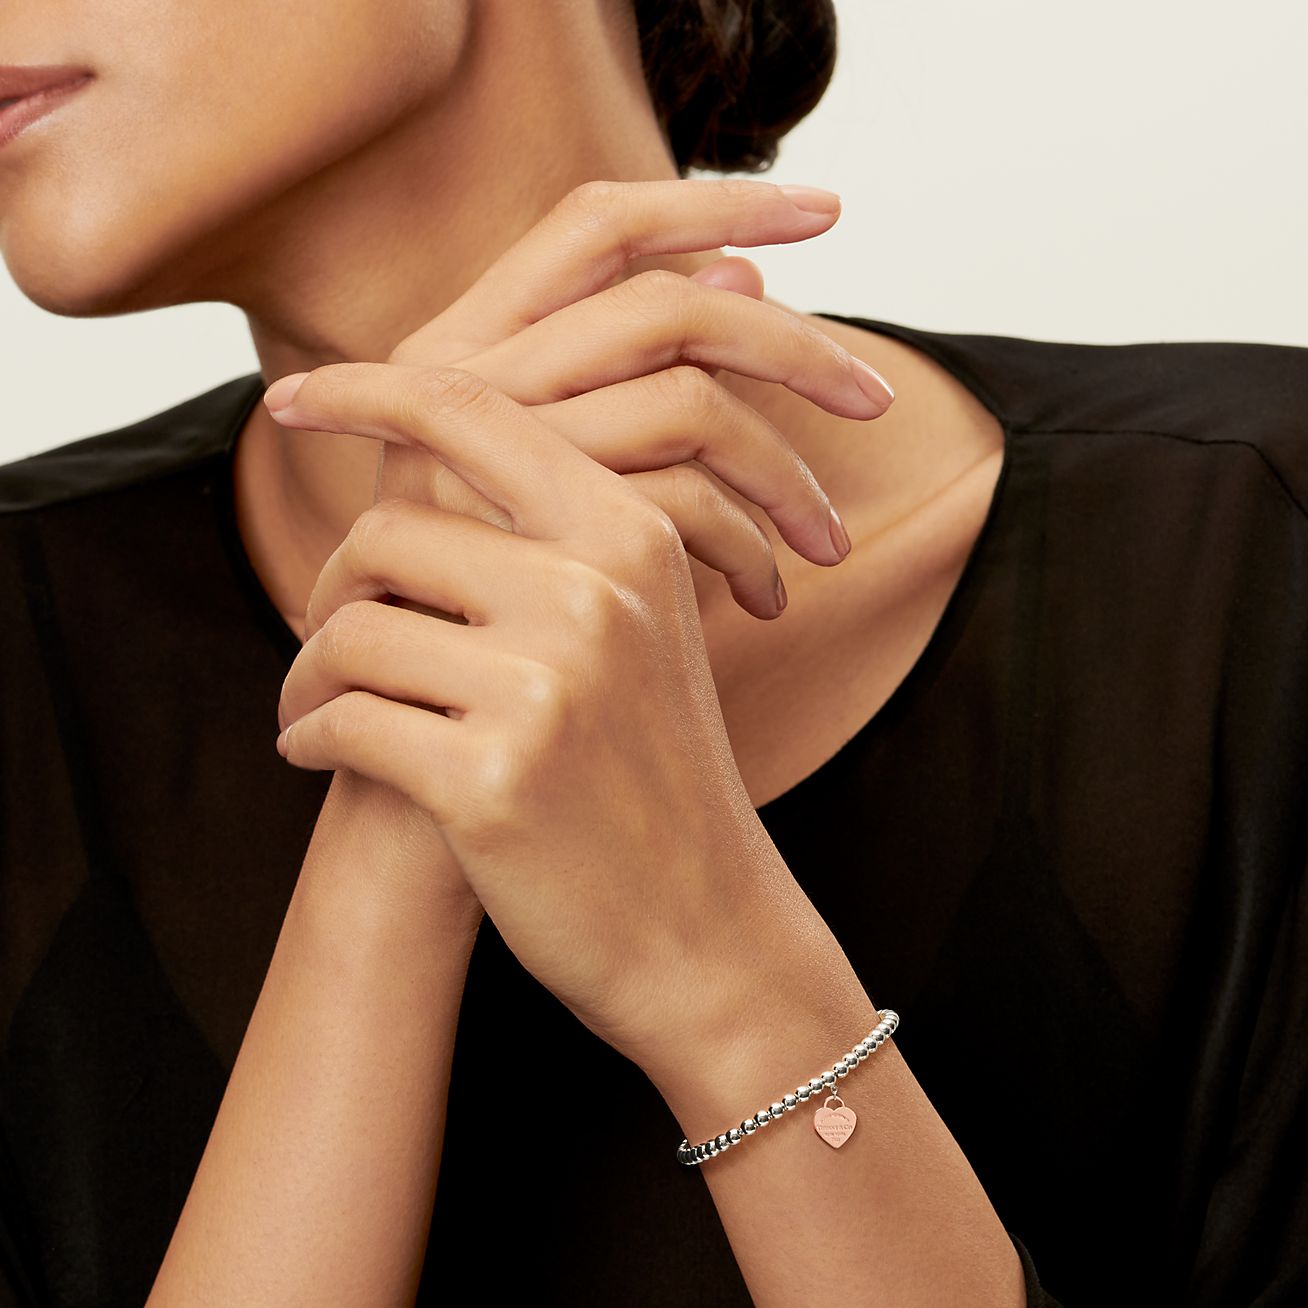 Return to Tiffany® Heart Tag Bead Bracelet in Silver and Rose Gold, 4 mm |  Tiffany & Co.